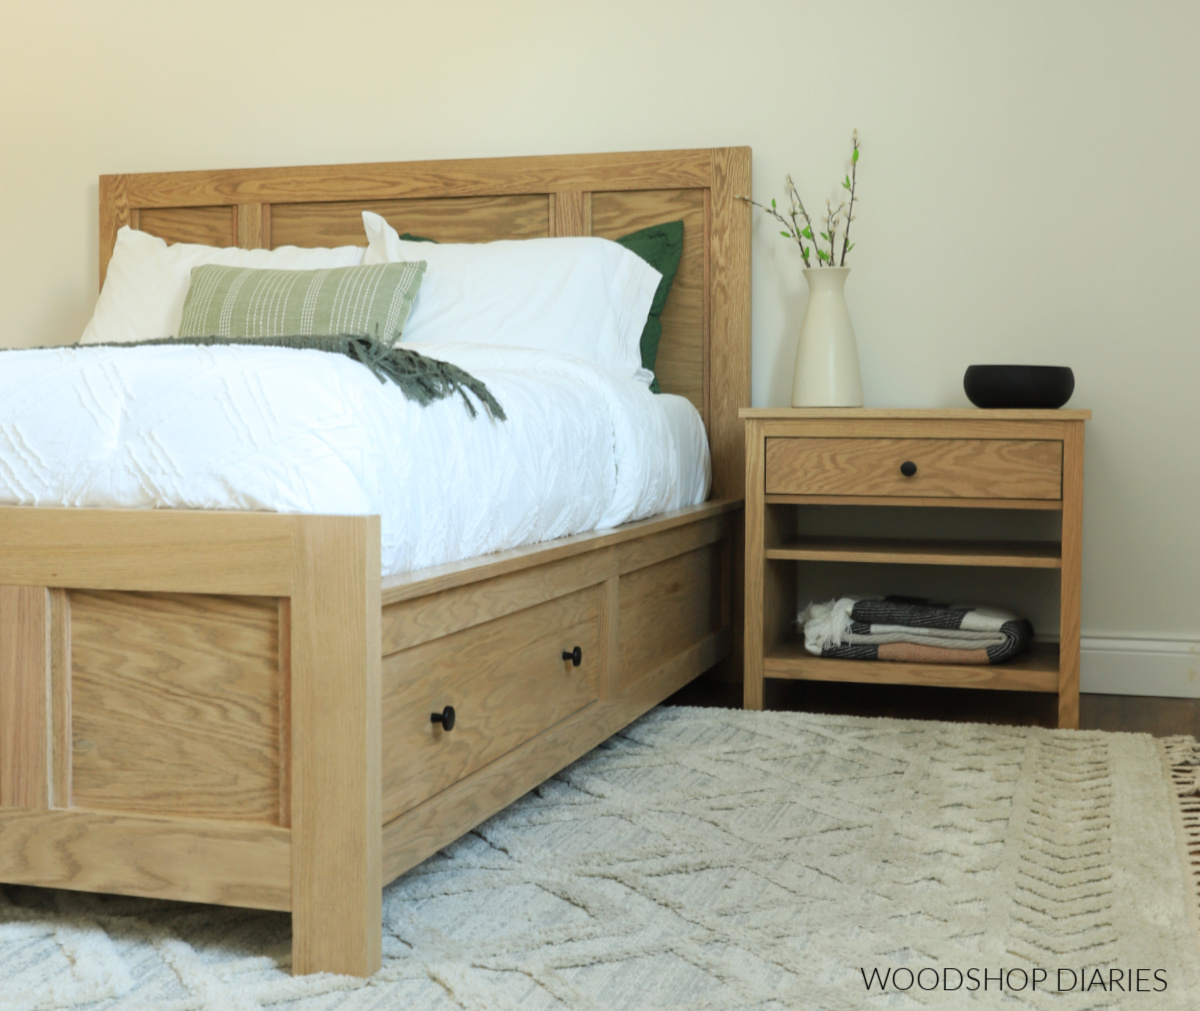 Red oak modern nightstand sitting next to DIY storage bed in bedroom with vase on top and blanket on bottom shelf